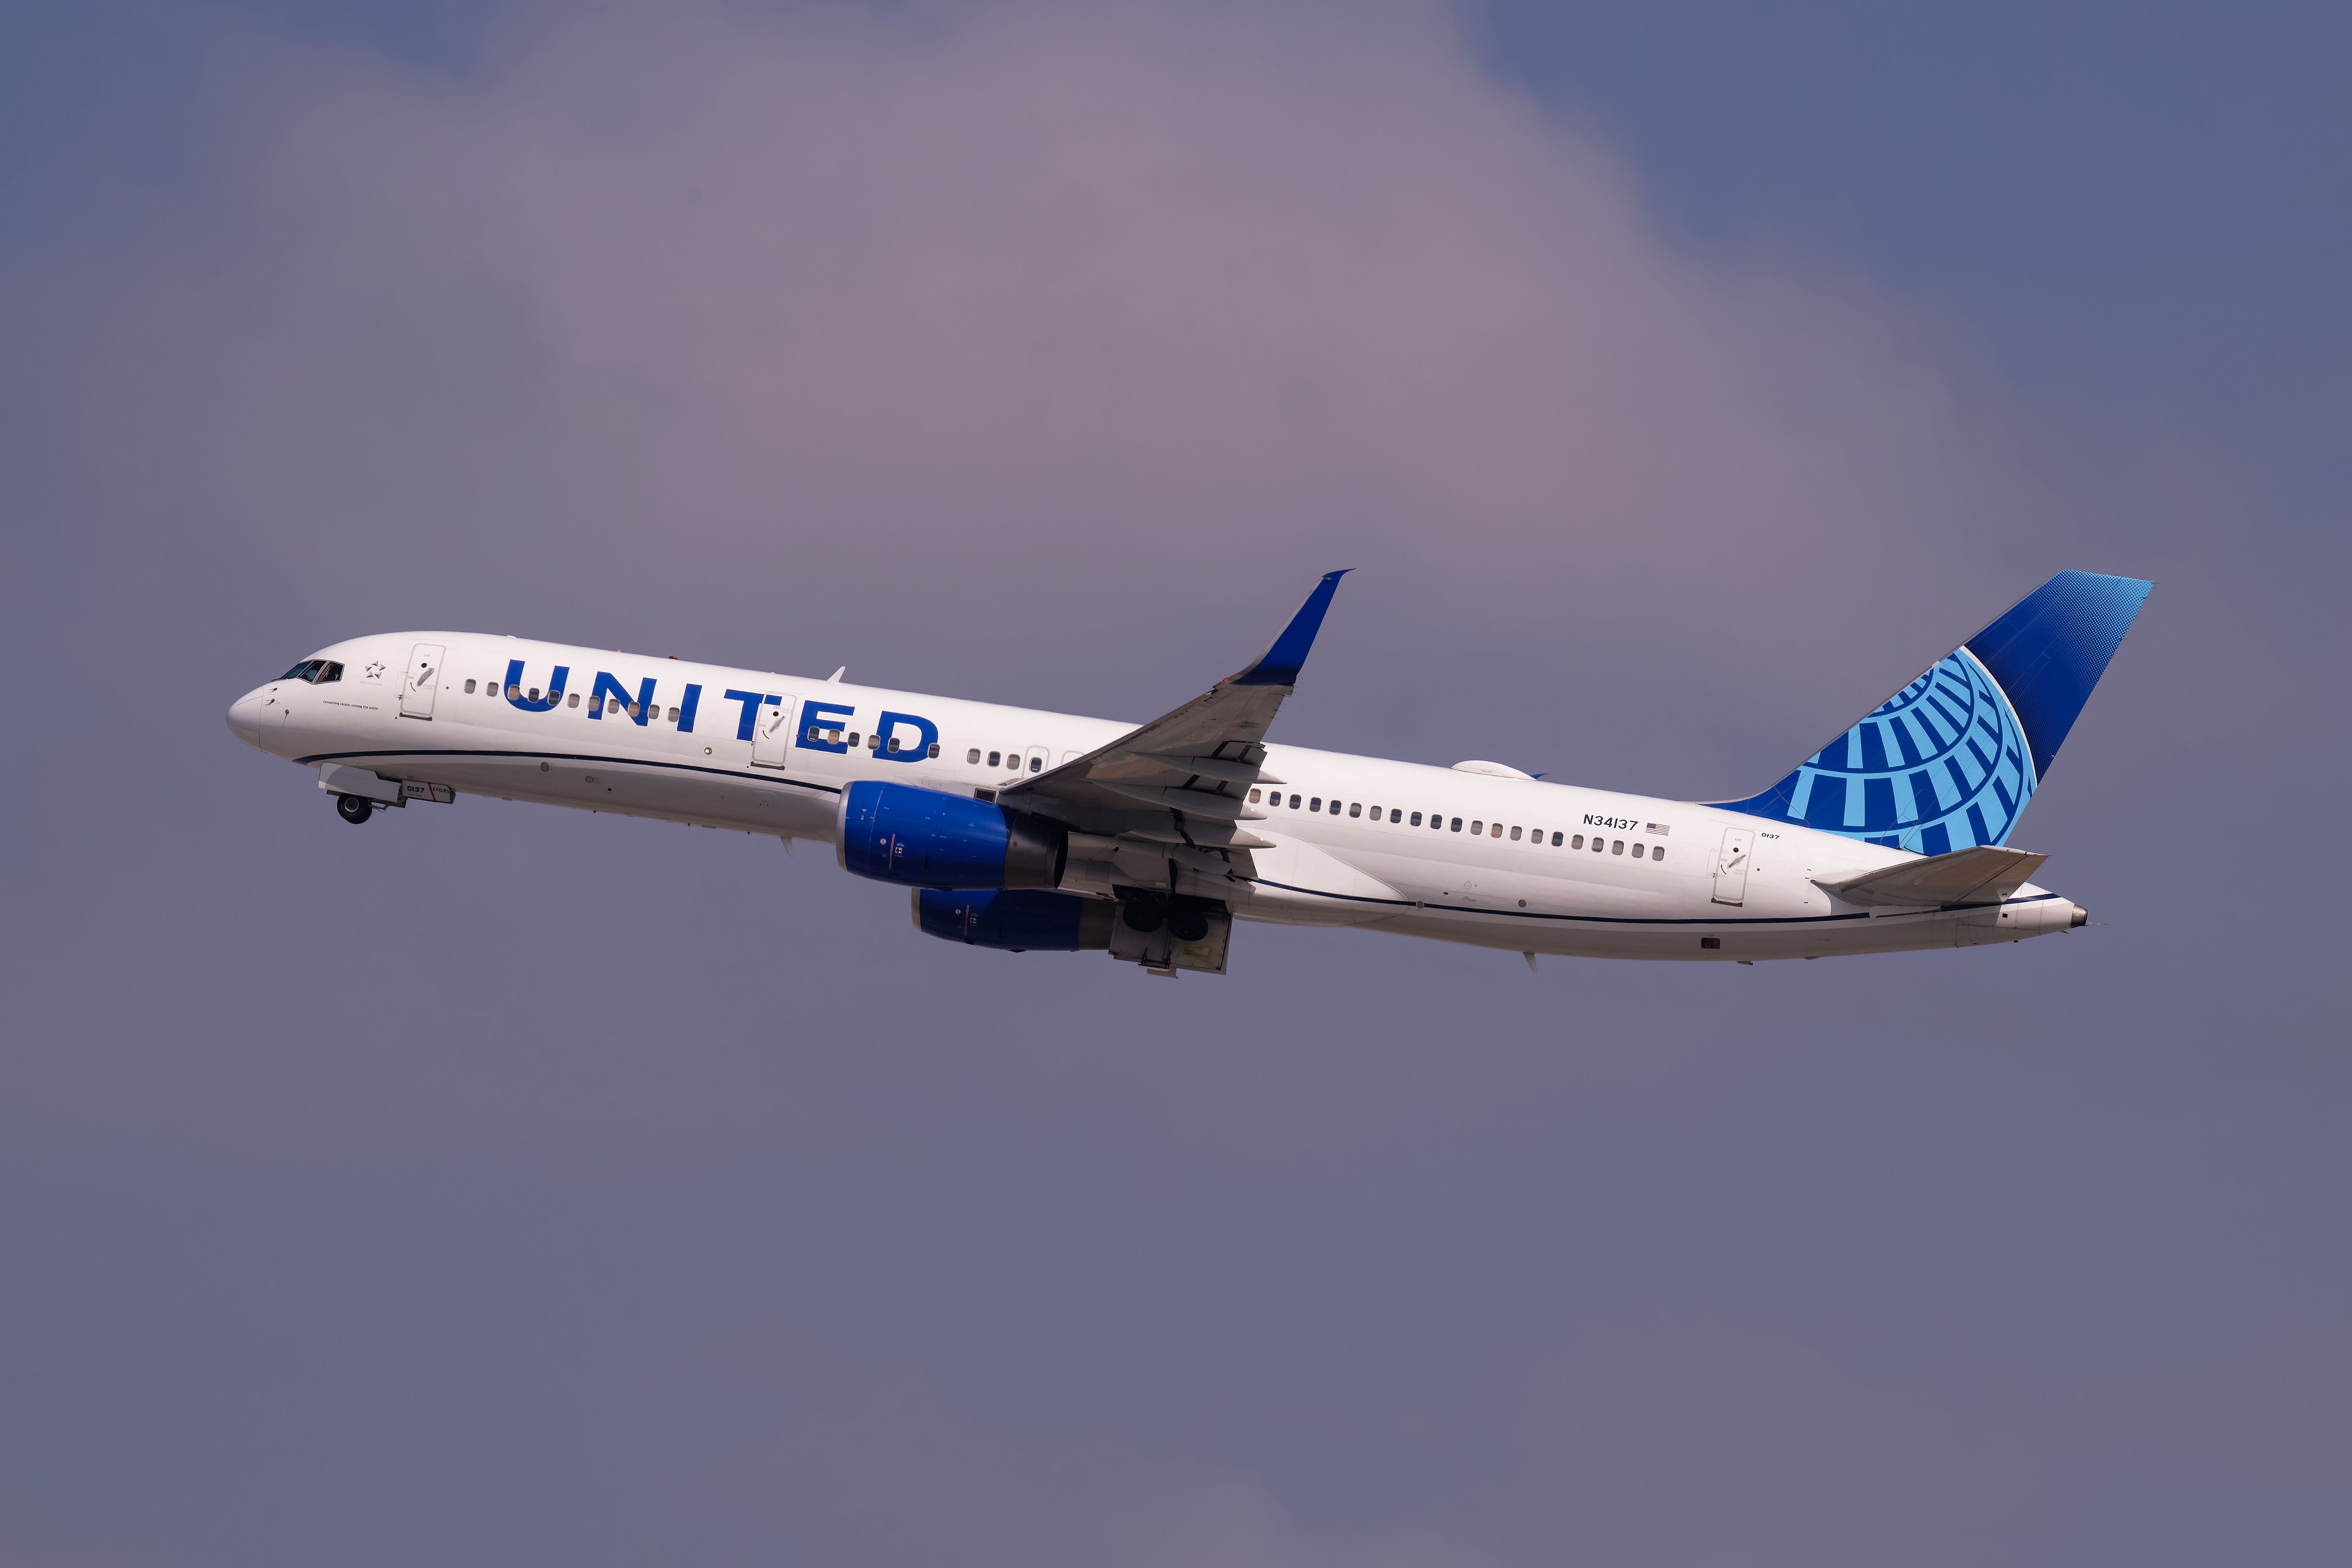 A United Airlines Boeing 757-224 flying in the sky.